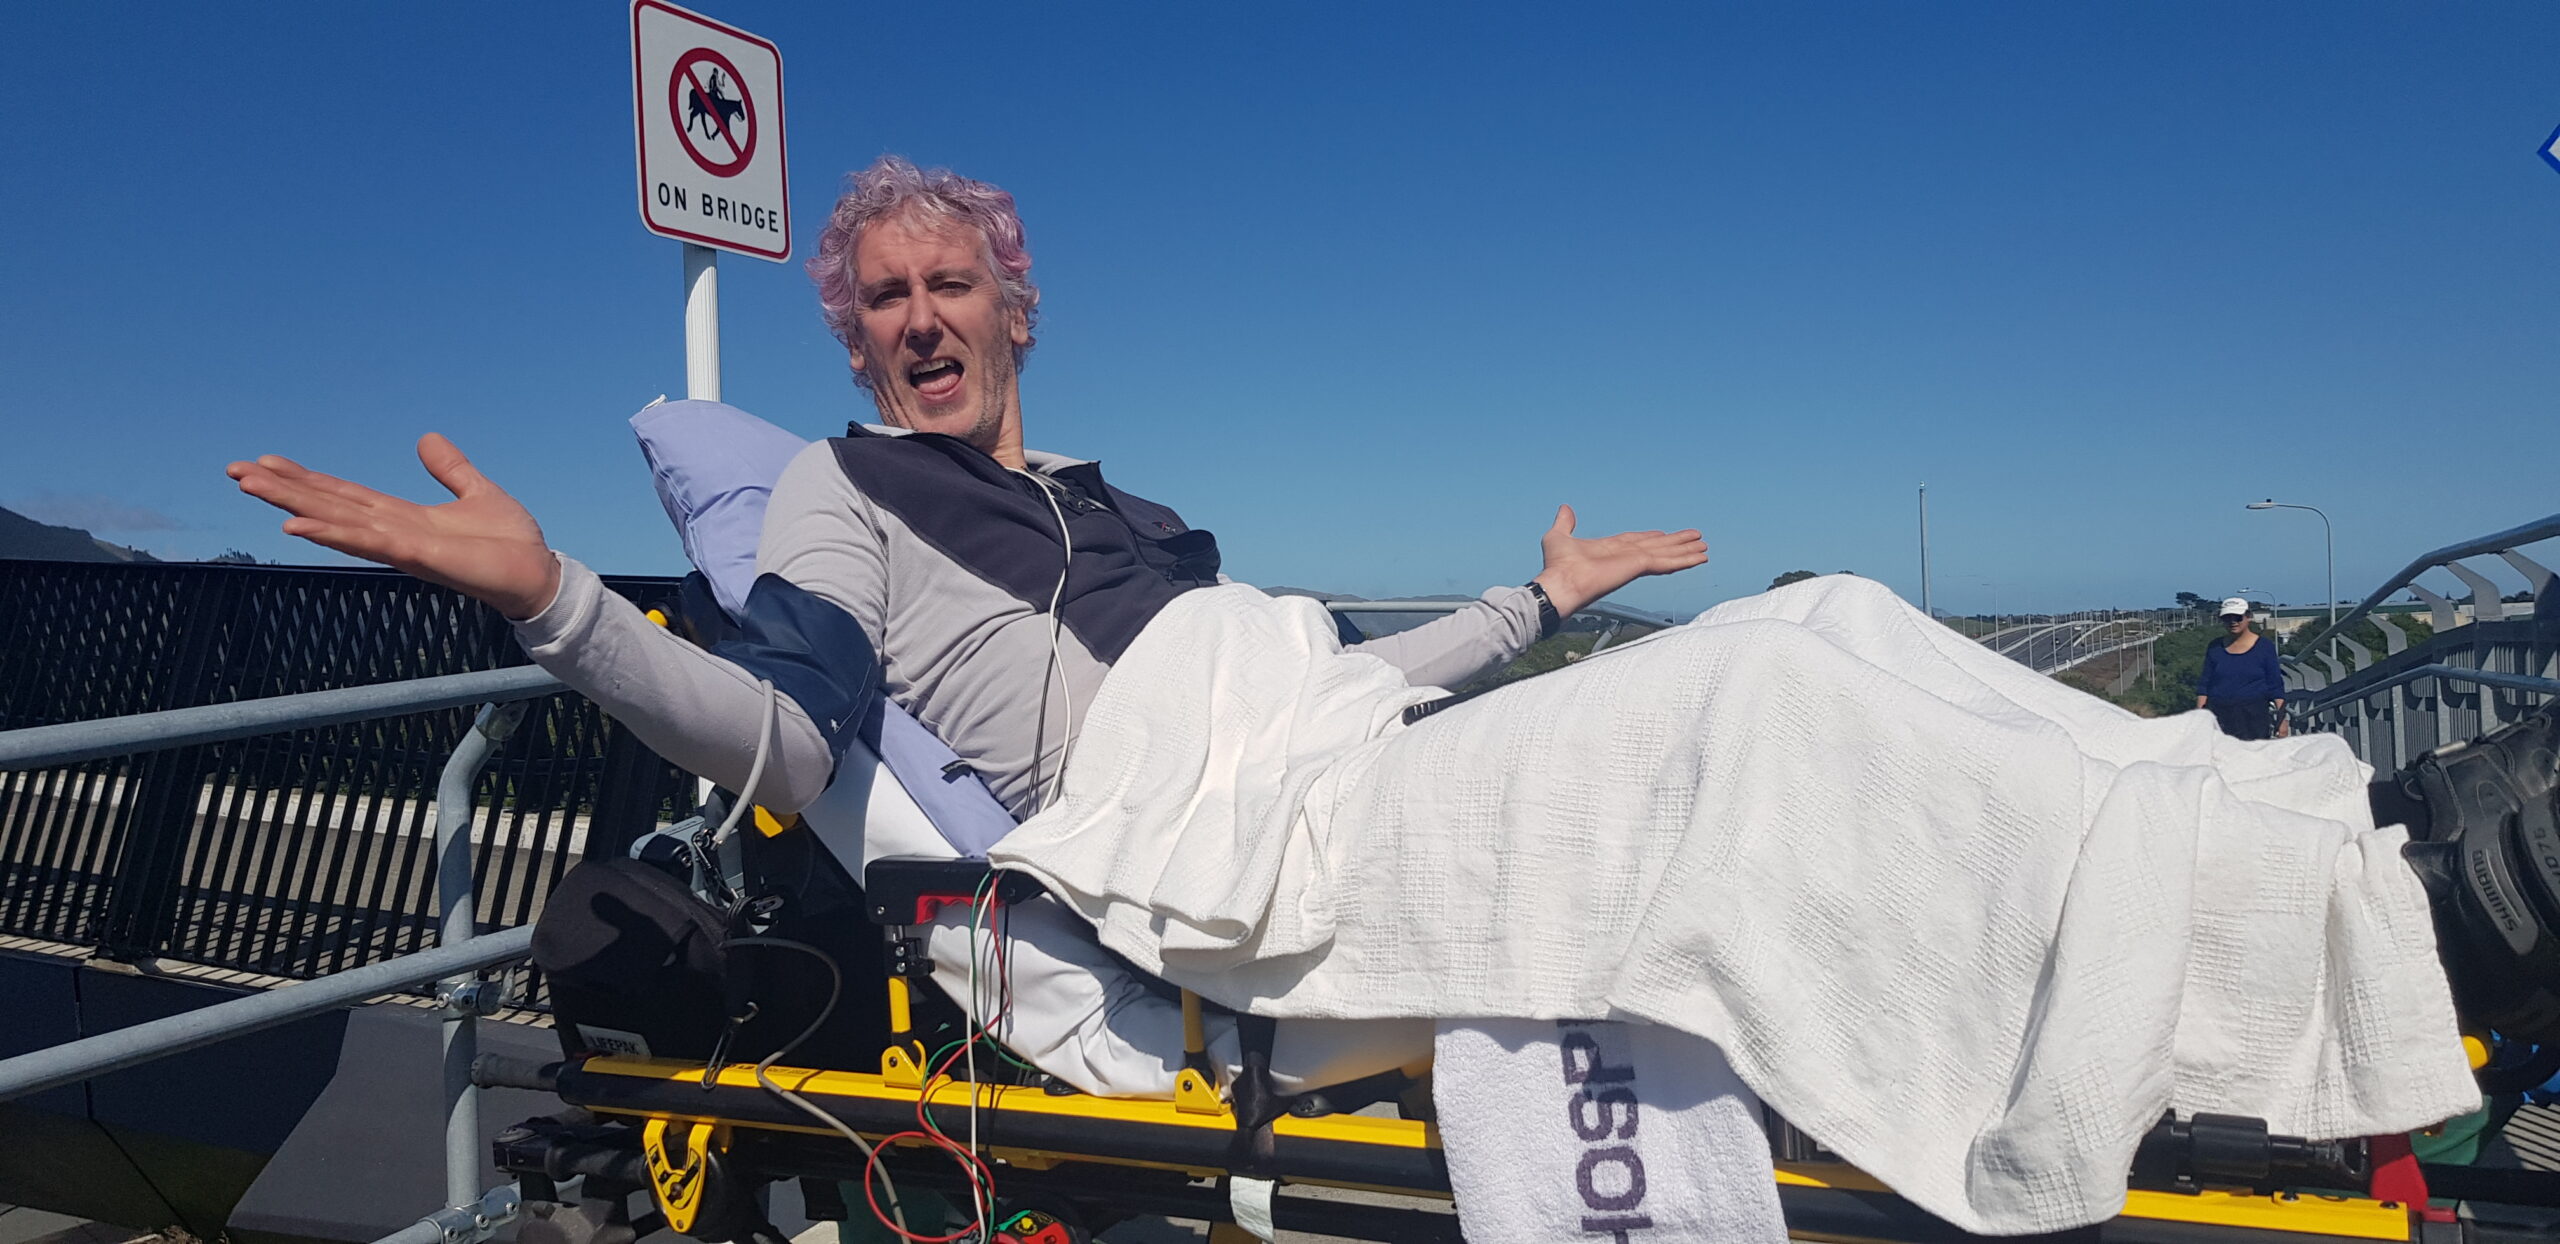 man on a gurney type stretcher with arms outstretched laughing against a blue sky.